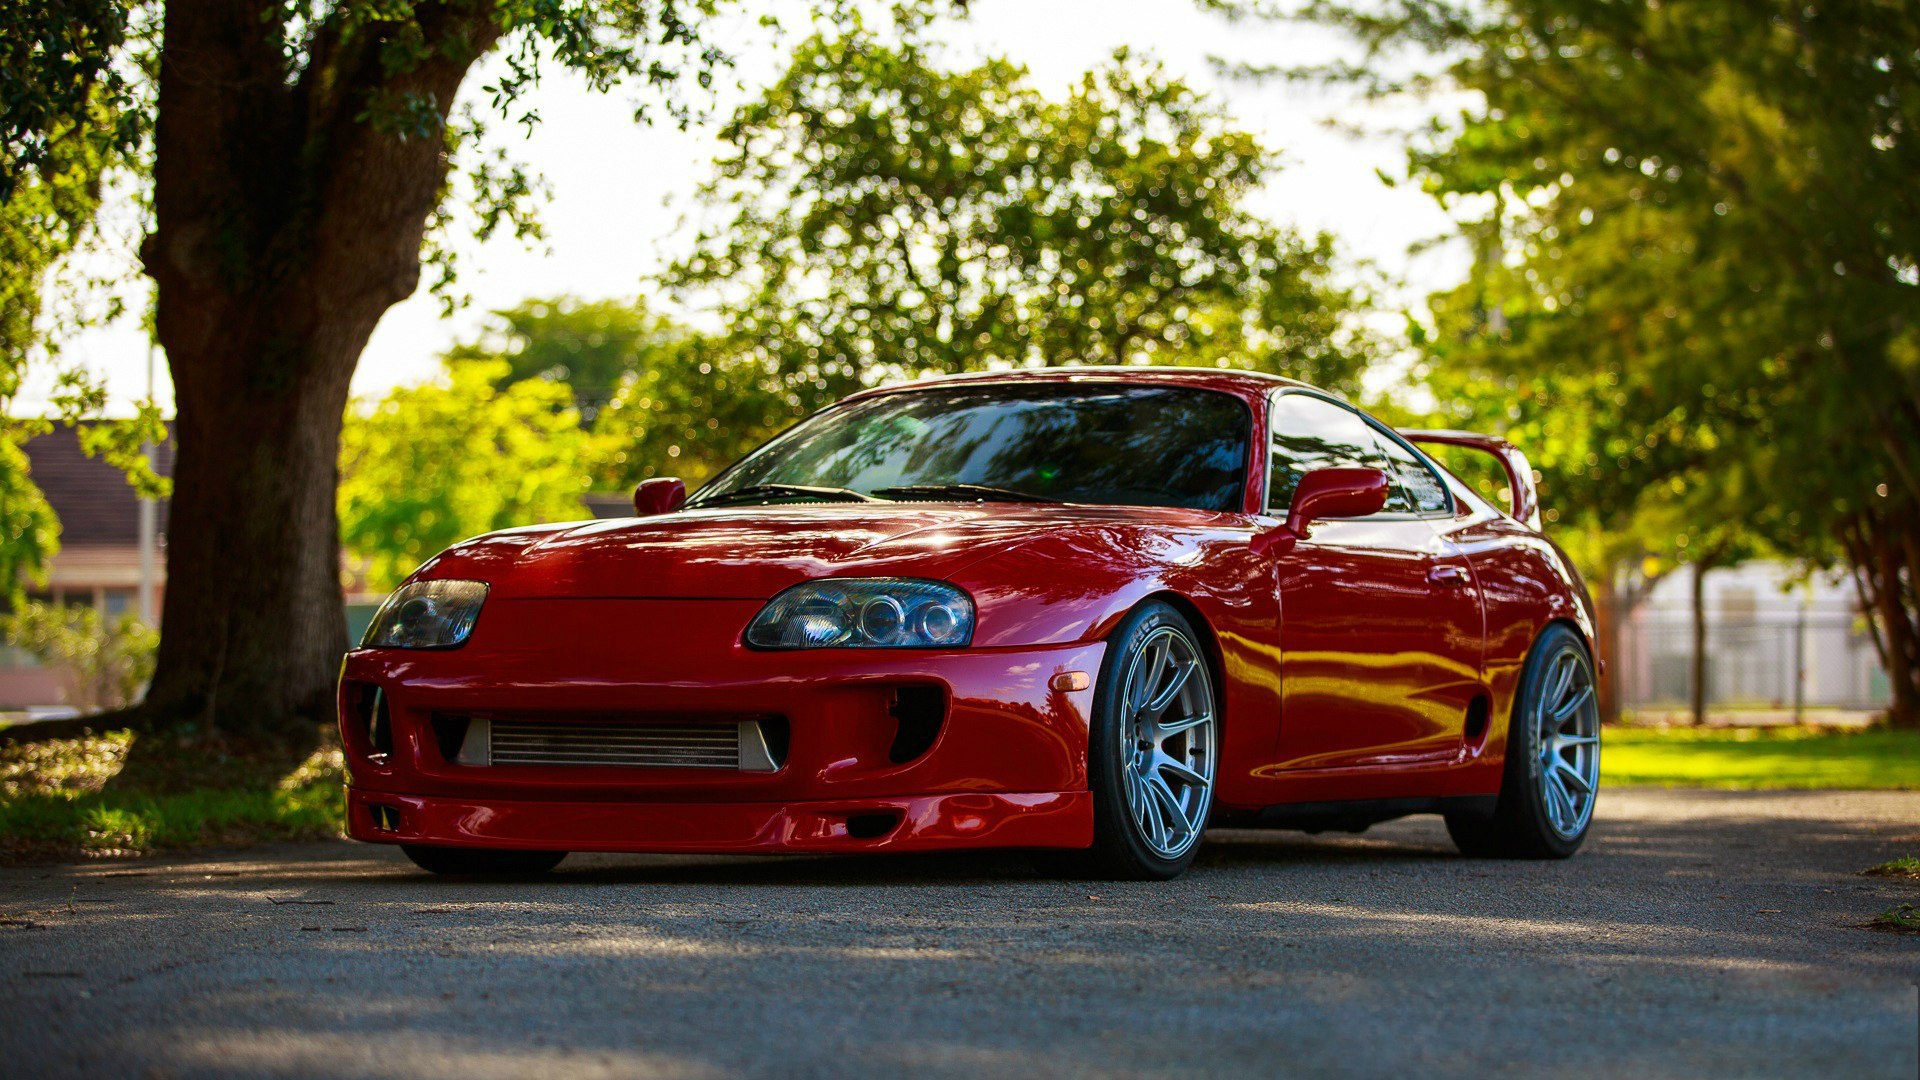 Toyota Supra Wallpapers Images Photos Pictures Backgrounds